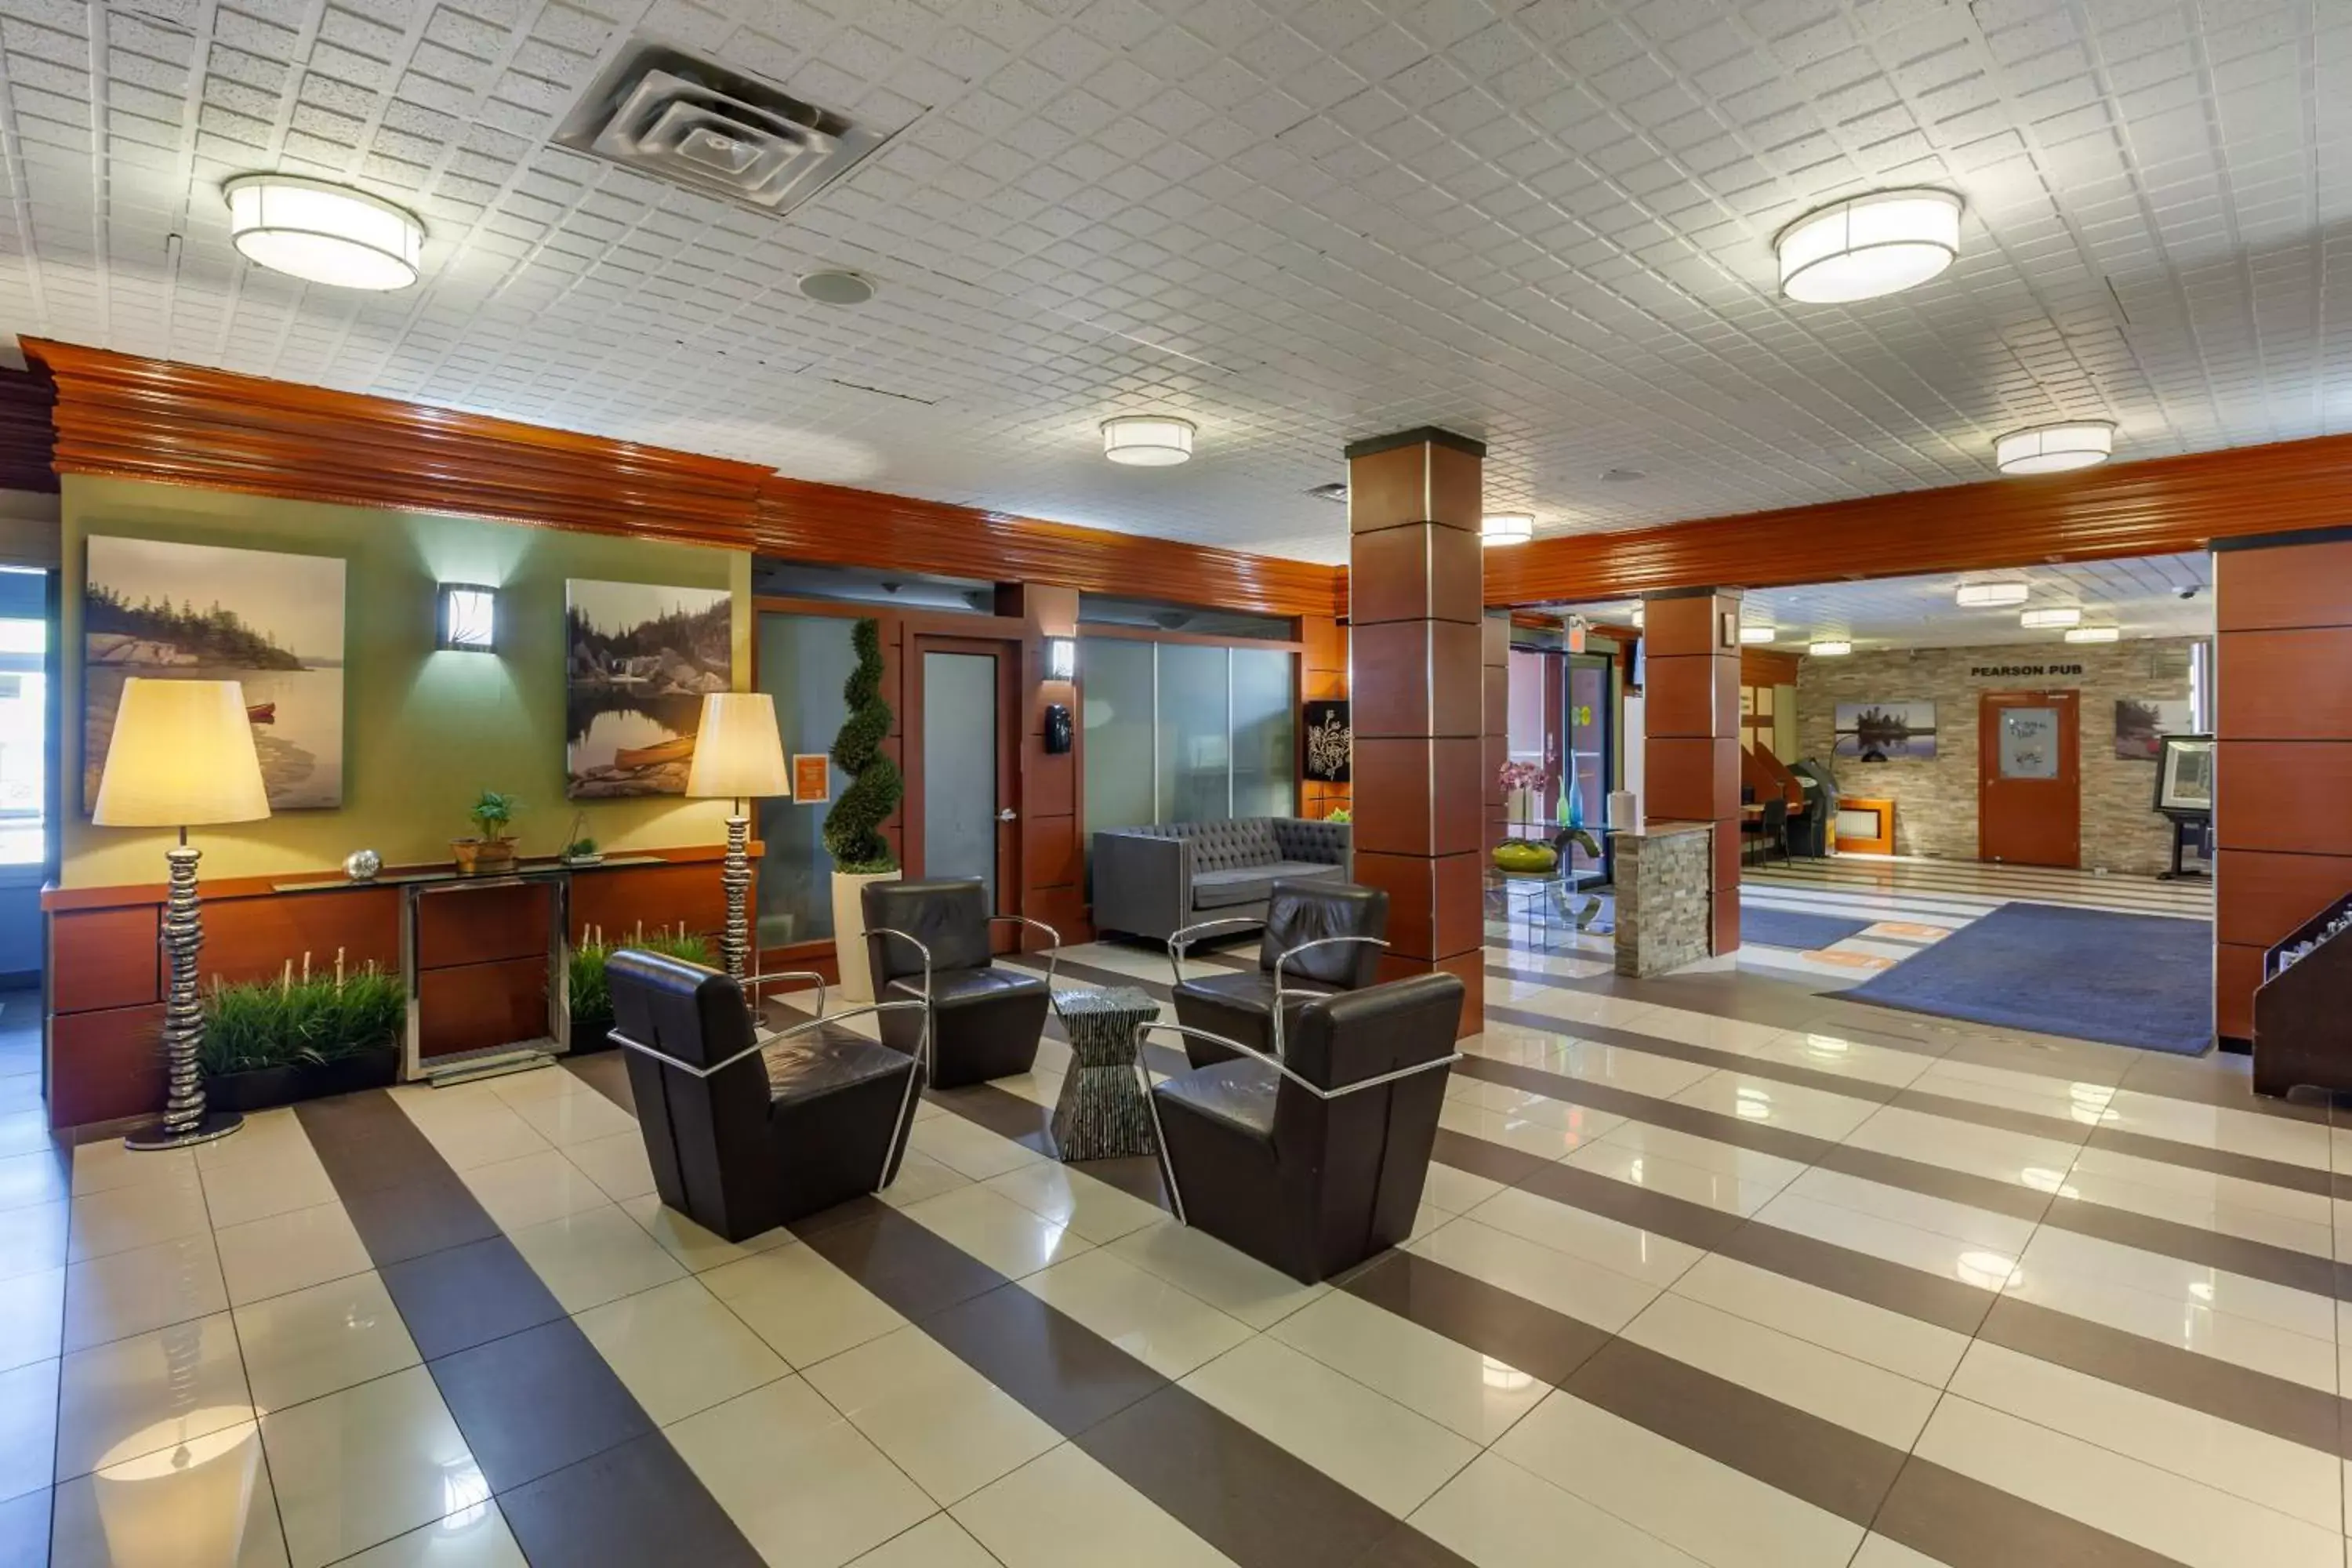 Property building, Lobby/Reception in Quality Inn Toronto Airport